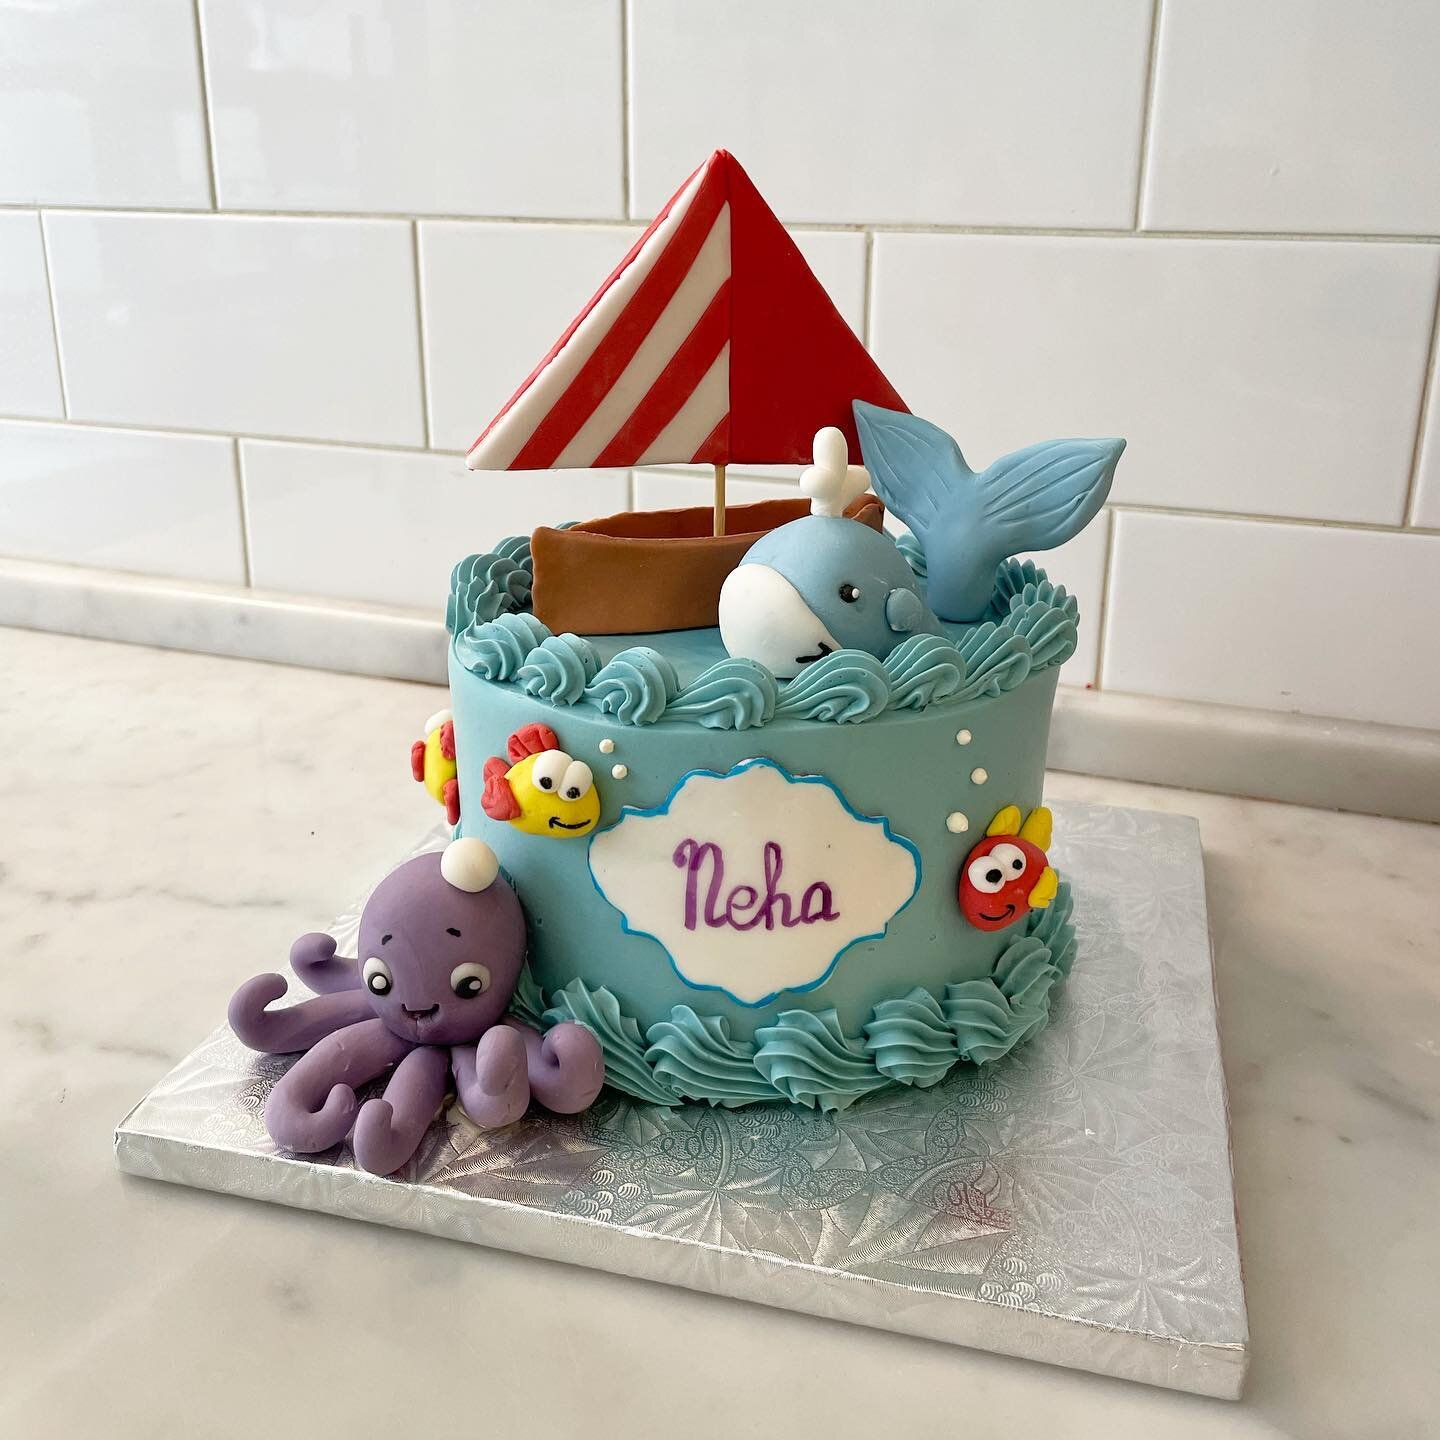 Happy birthday Neha! ⛵️ Make a splash at your next birthday party with one of our custom cakes 🎂